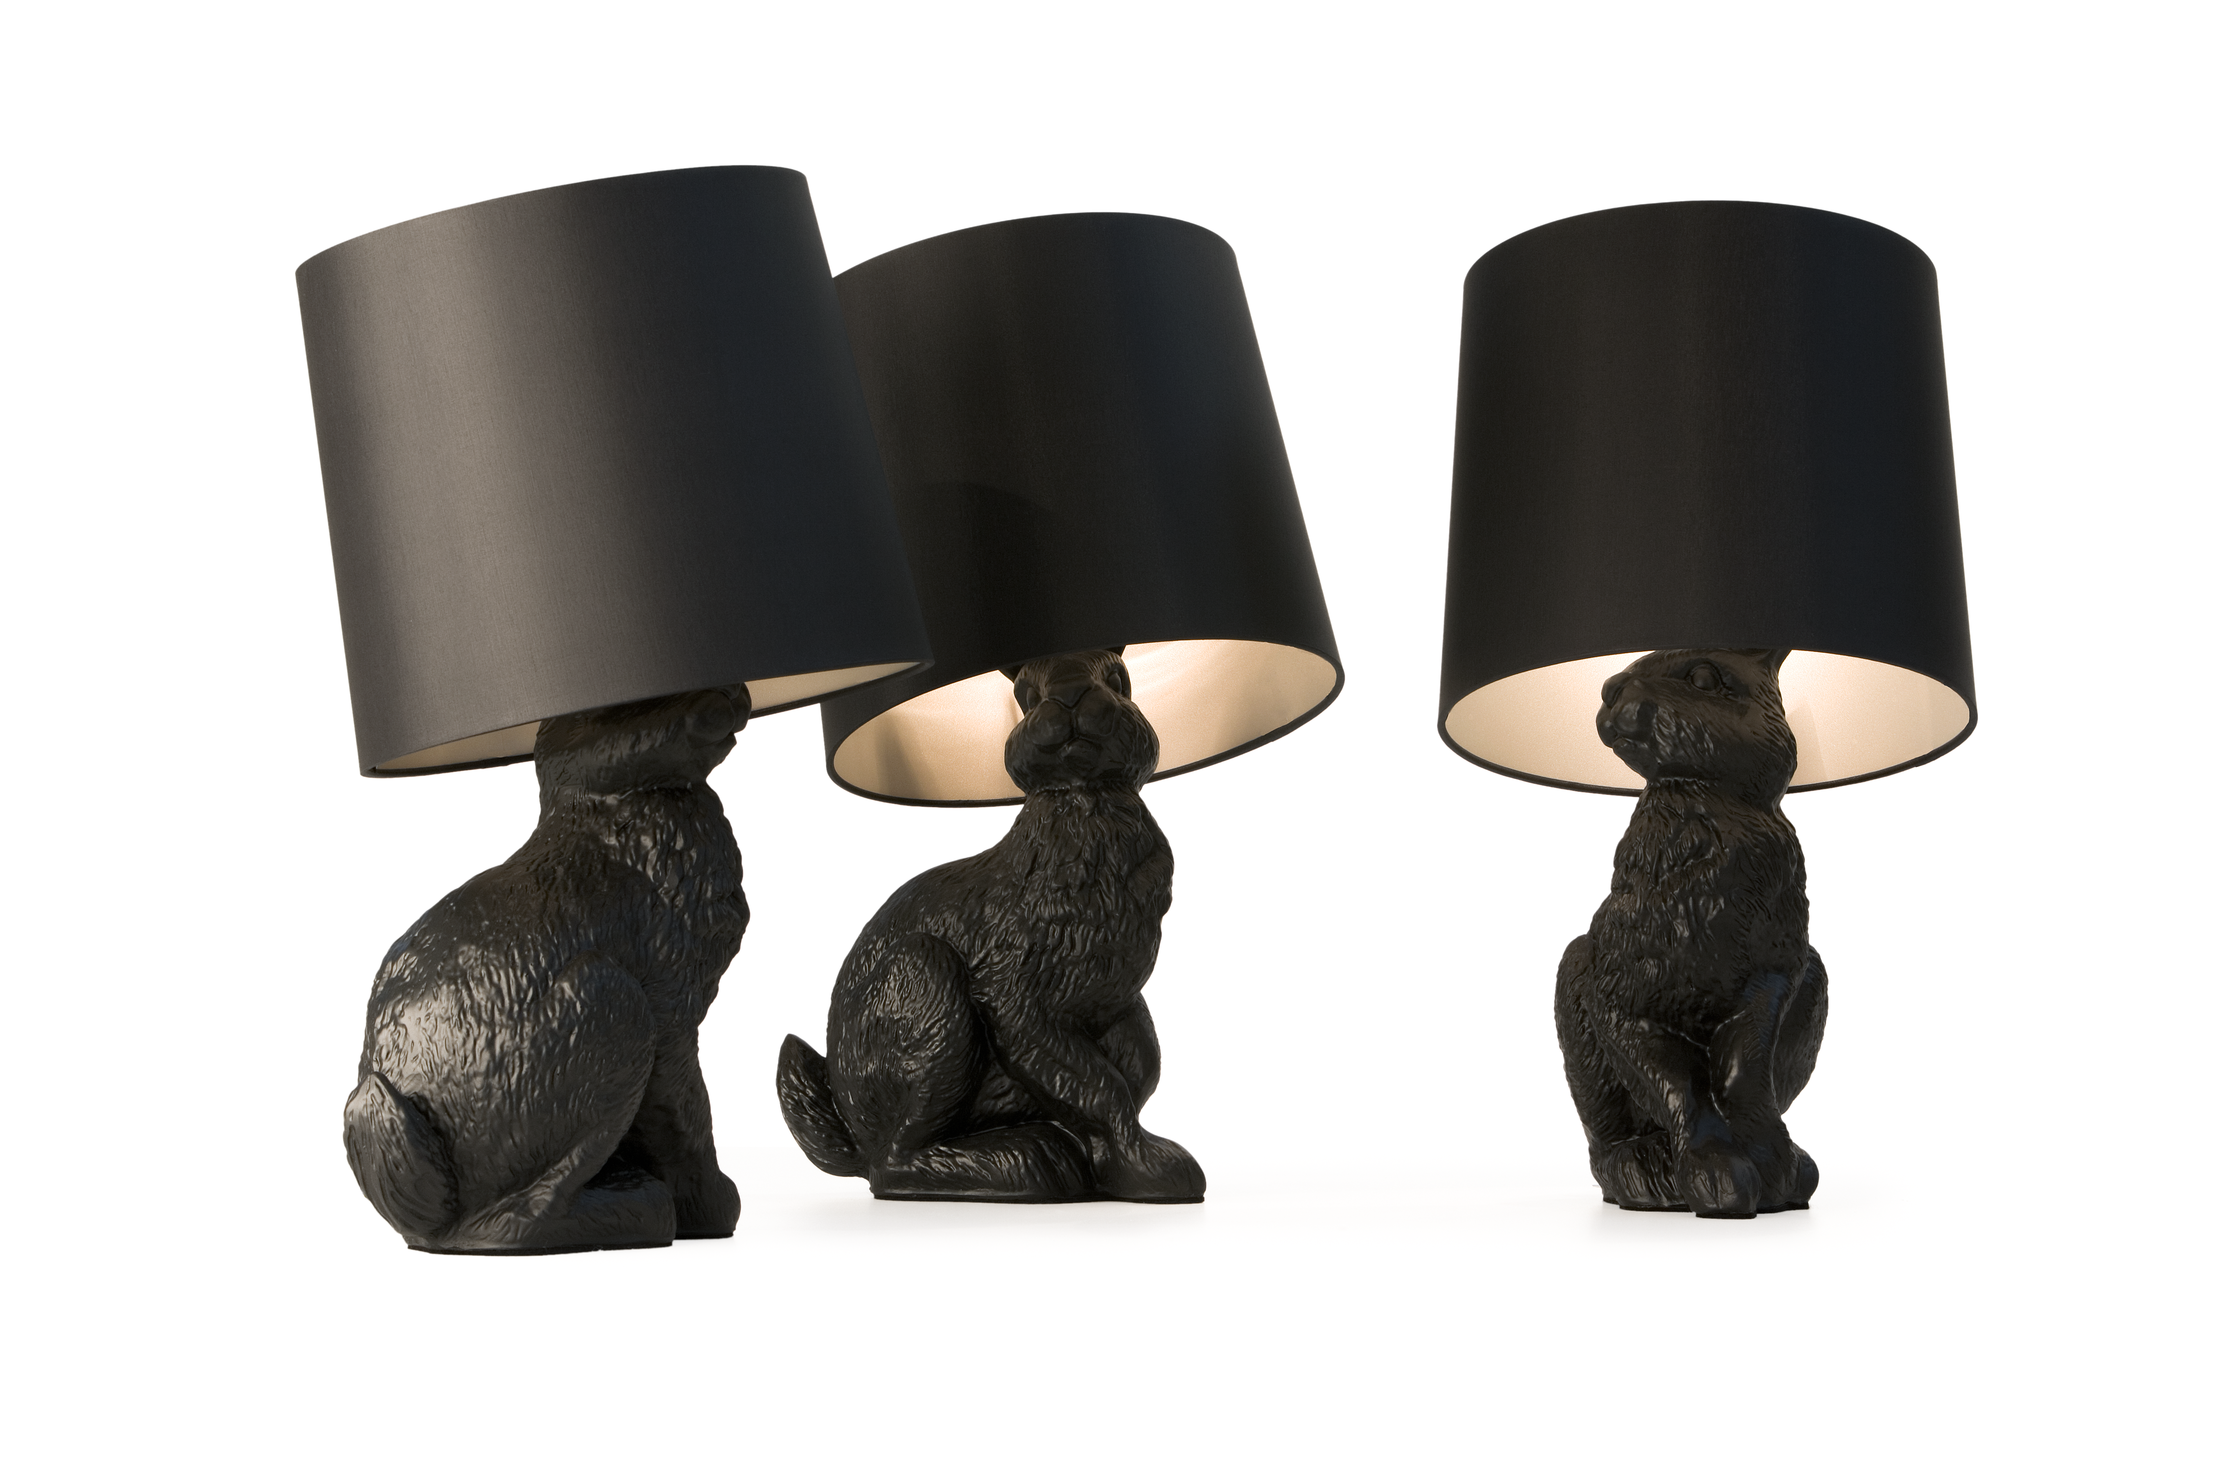 Rabbit lamp group with different point of view